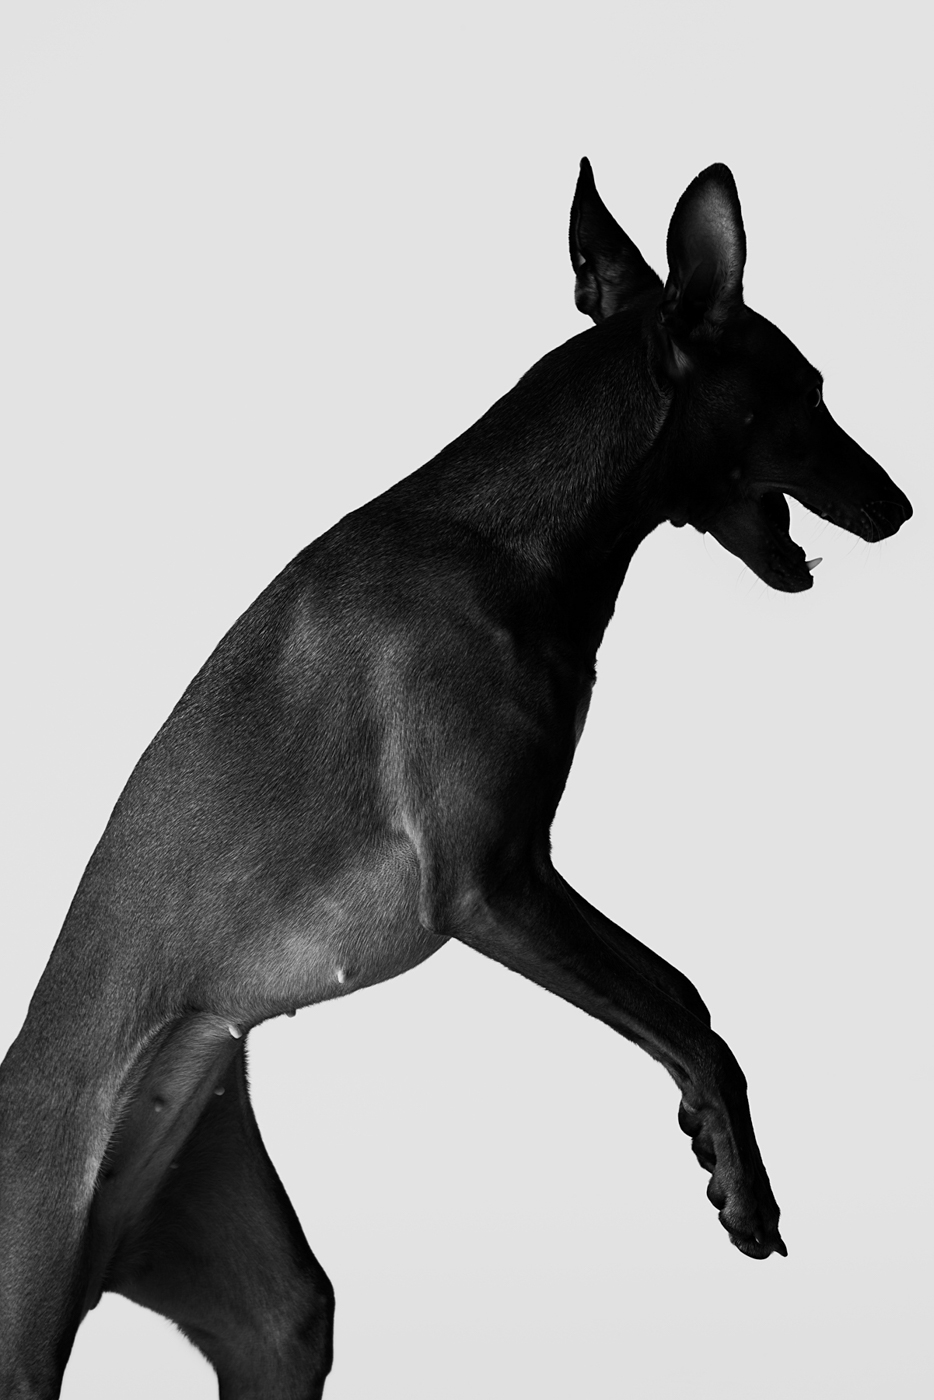 Black_and_white_portrait_of_Cirneco_dell'etna_dog_jumping_photographed_by_Sara_Lehtomaa